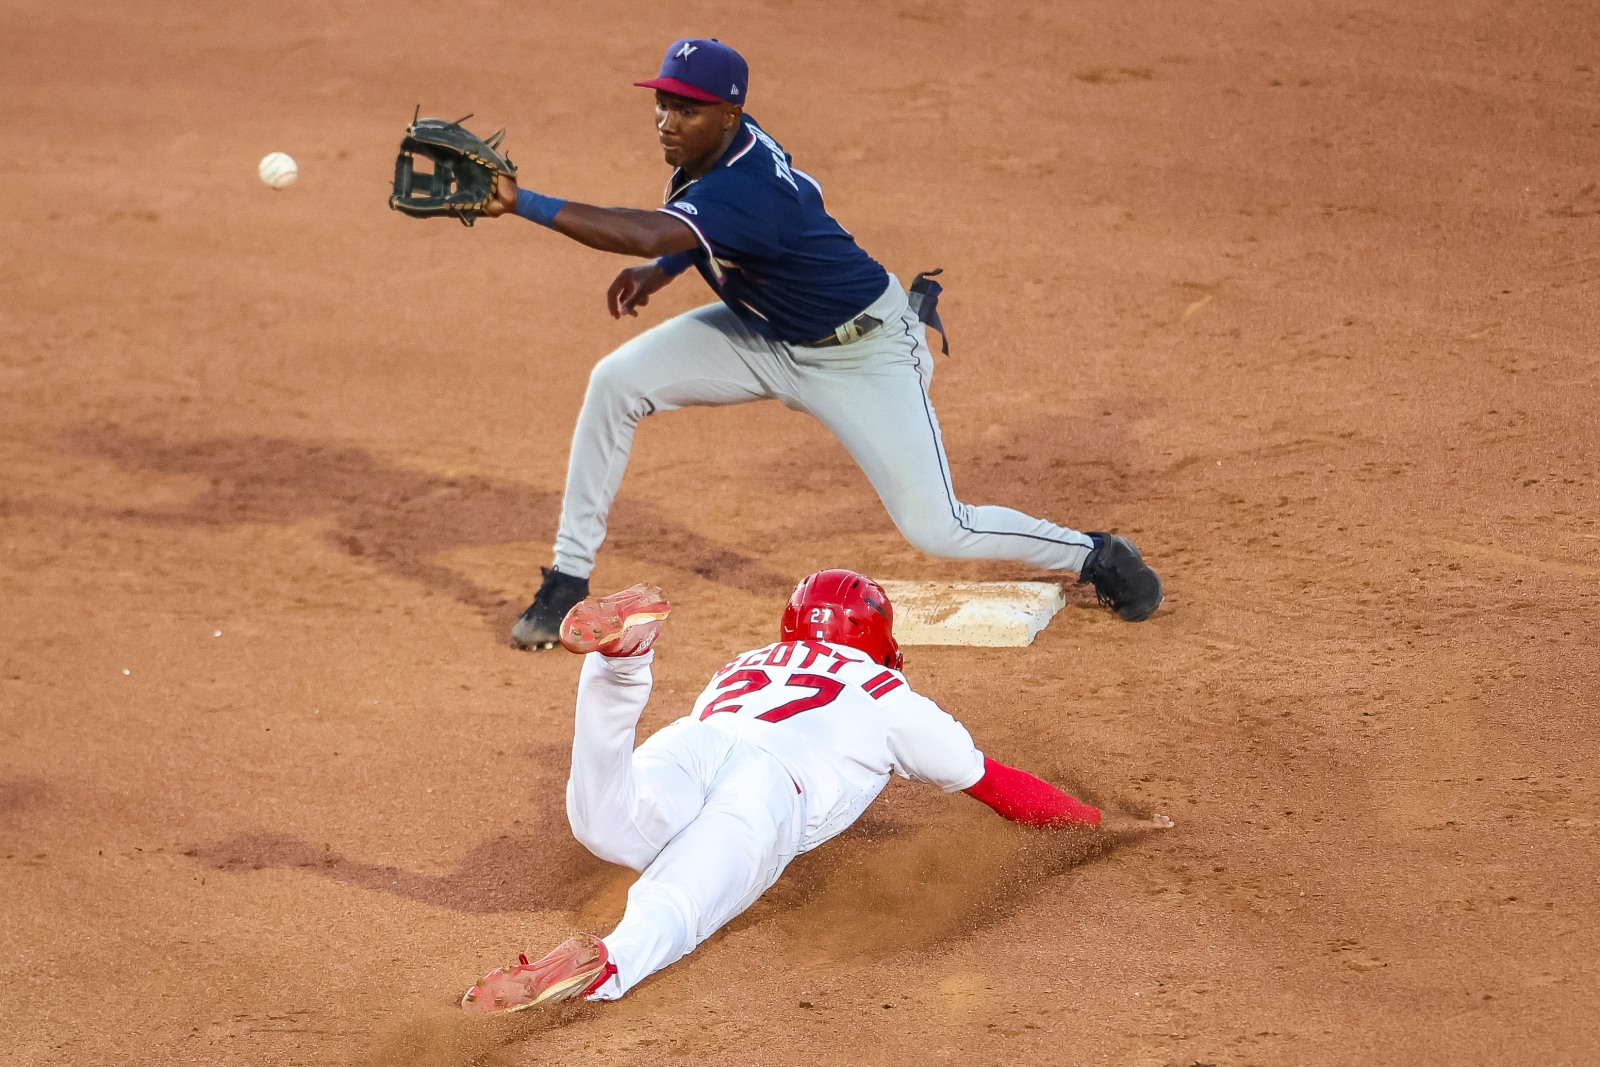 Victor Scott II, wearing a Springfield Cardinals uniform, steals second base during a game